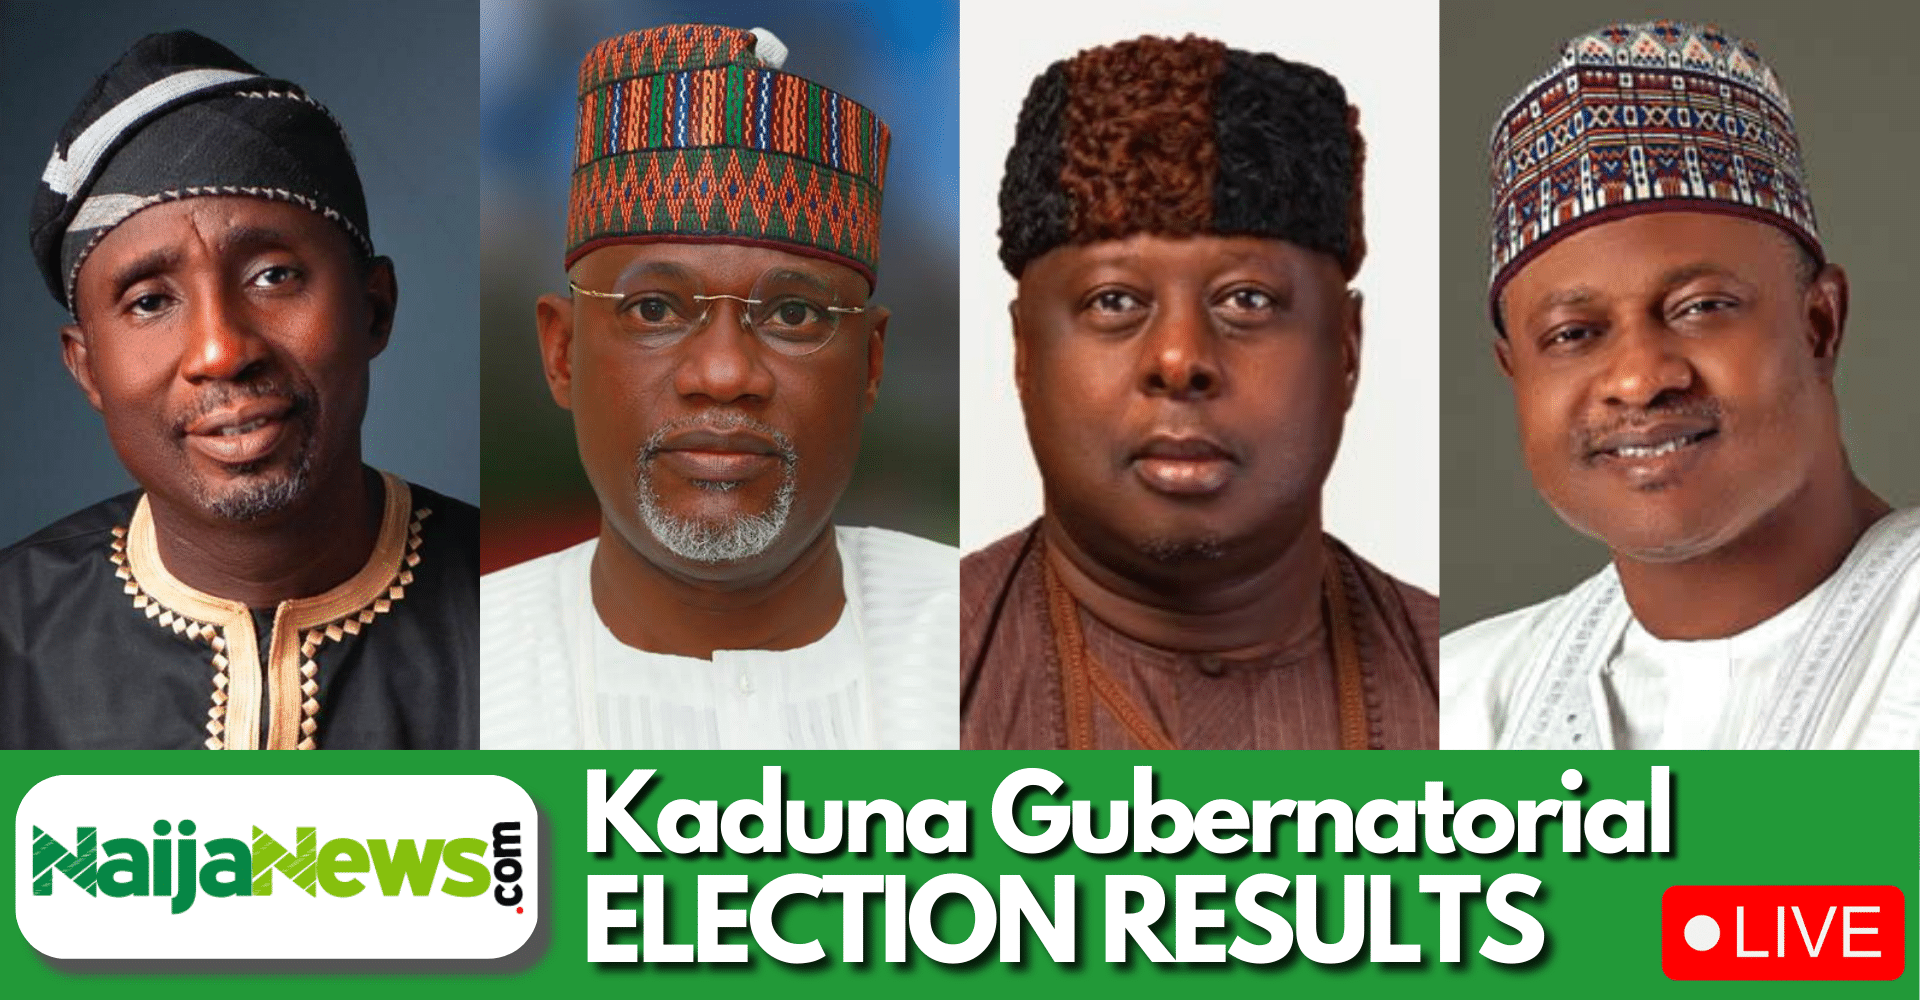 Vote Counting Begins In Kaduna State As Election Ends